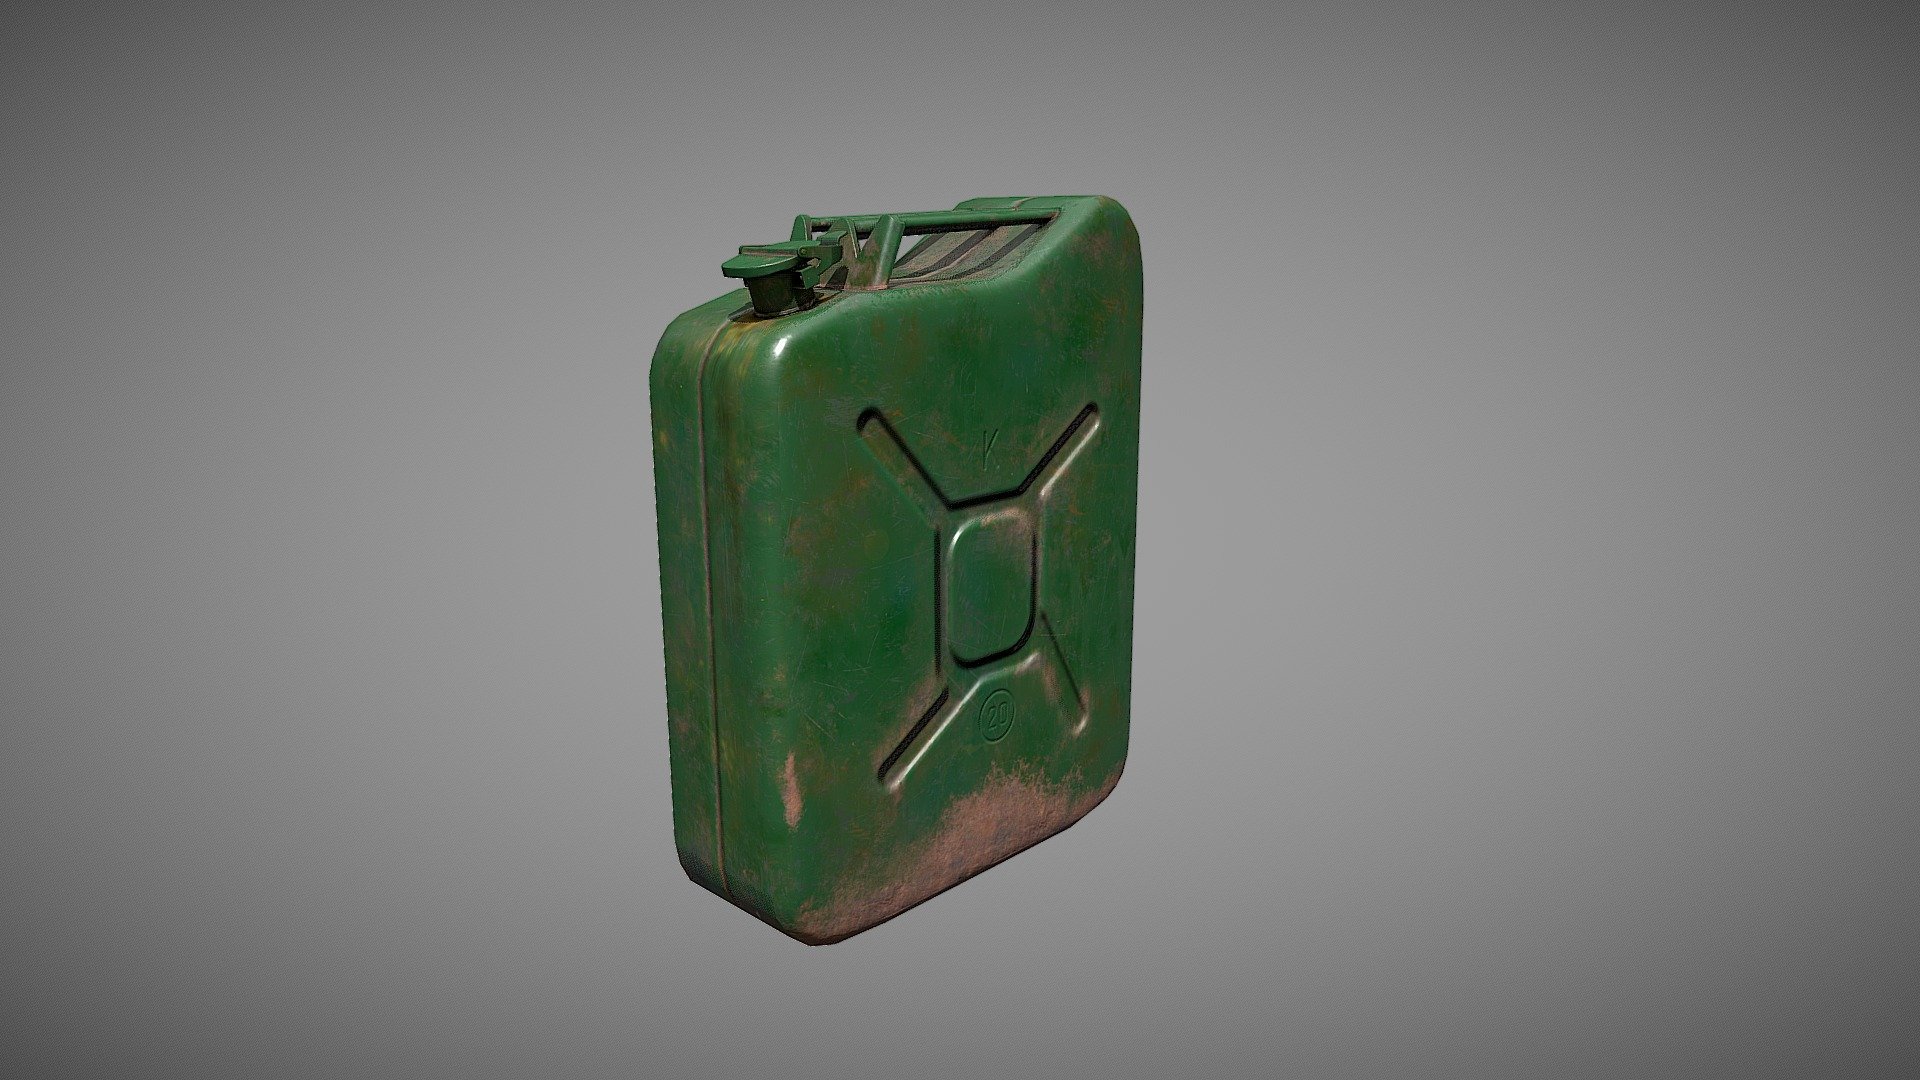 Gasoline Jerry Can low-poly 3d model ready for Virtual Reality (VR), Augmented Reality (AR), games and other real-time apps.

PBR Game Ready

Game ready with PBR Textures 
UE4 Optimized - Metalness Use for PBR 
Real World Scale Measurements 
Mikk Tangent Space

Maps included 
2048 x 2048 
4096 x 4096 
D (Diffuse) 
N (Normal) 
AO_R_M (Red Channel - Ambient Occlusion | Green Channel - Raughnes | Blue Channel - Metalic)

TGA format

Rendered in Marmoset Toolbag - Gasoline Jerry Can - 3D model by konast 3d model